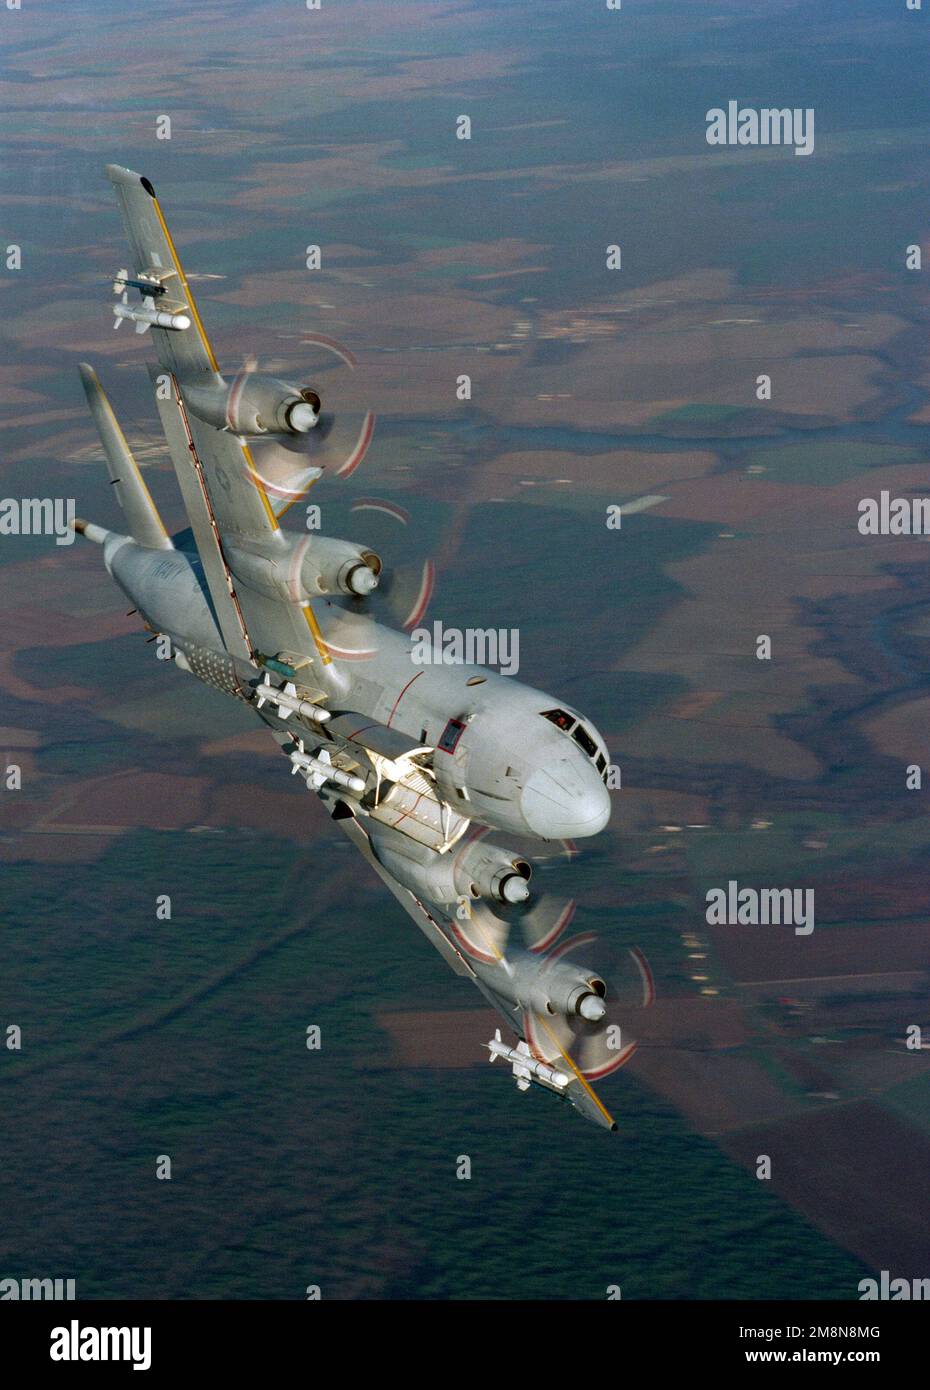 An air-to-air view of a P-3 Orion aircraft banking to the right. This aircraft is carrying an AIM-9 Sidewinder missile on each outboard wing pylon and a total of four Harpoon missiles under its wings and fuselage. Country: Unknown Stock Photo